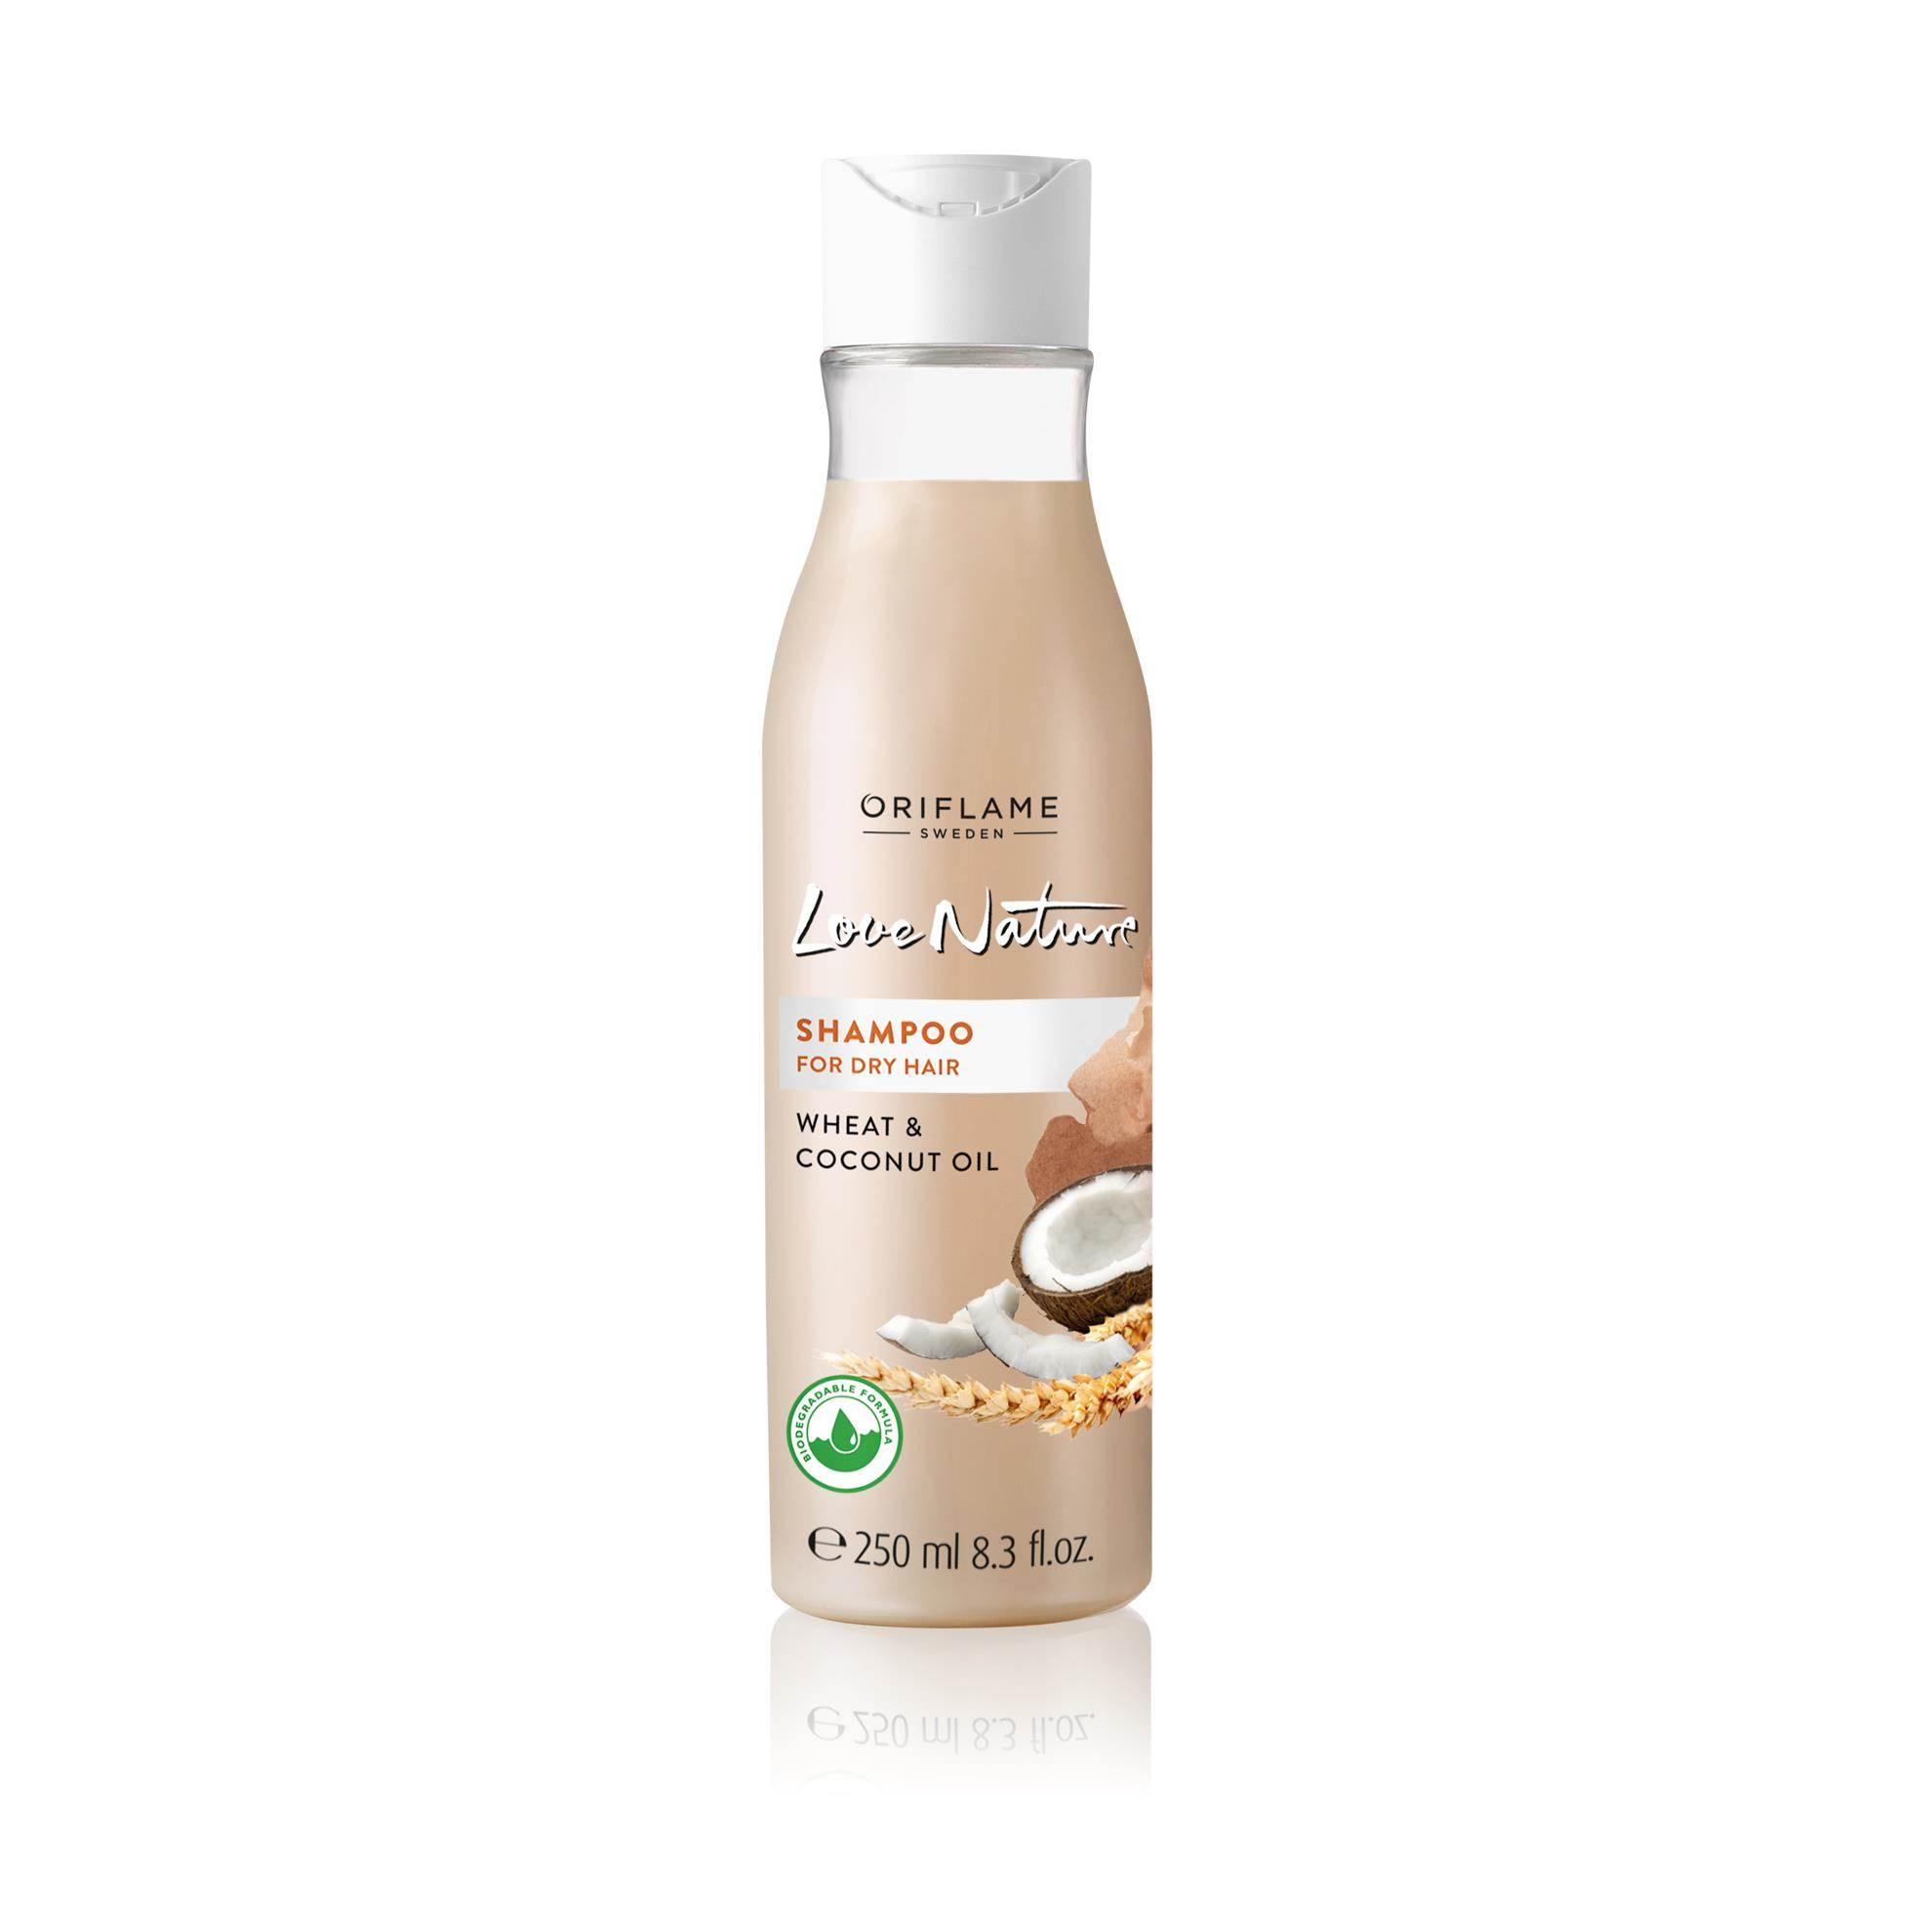 love-nature-shampoo-for-dry-hair-wheat-coconut-oil